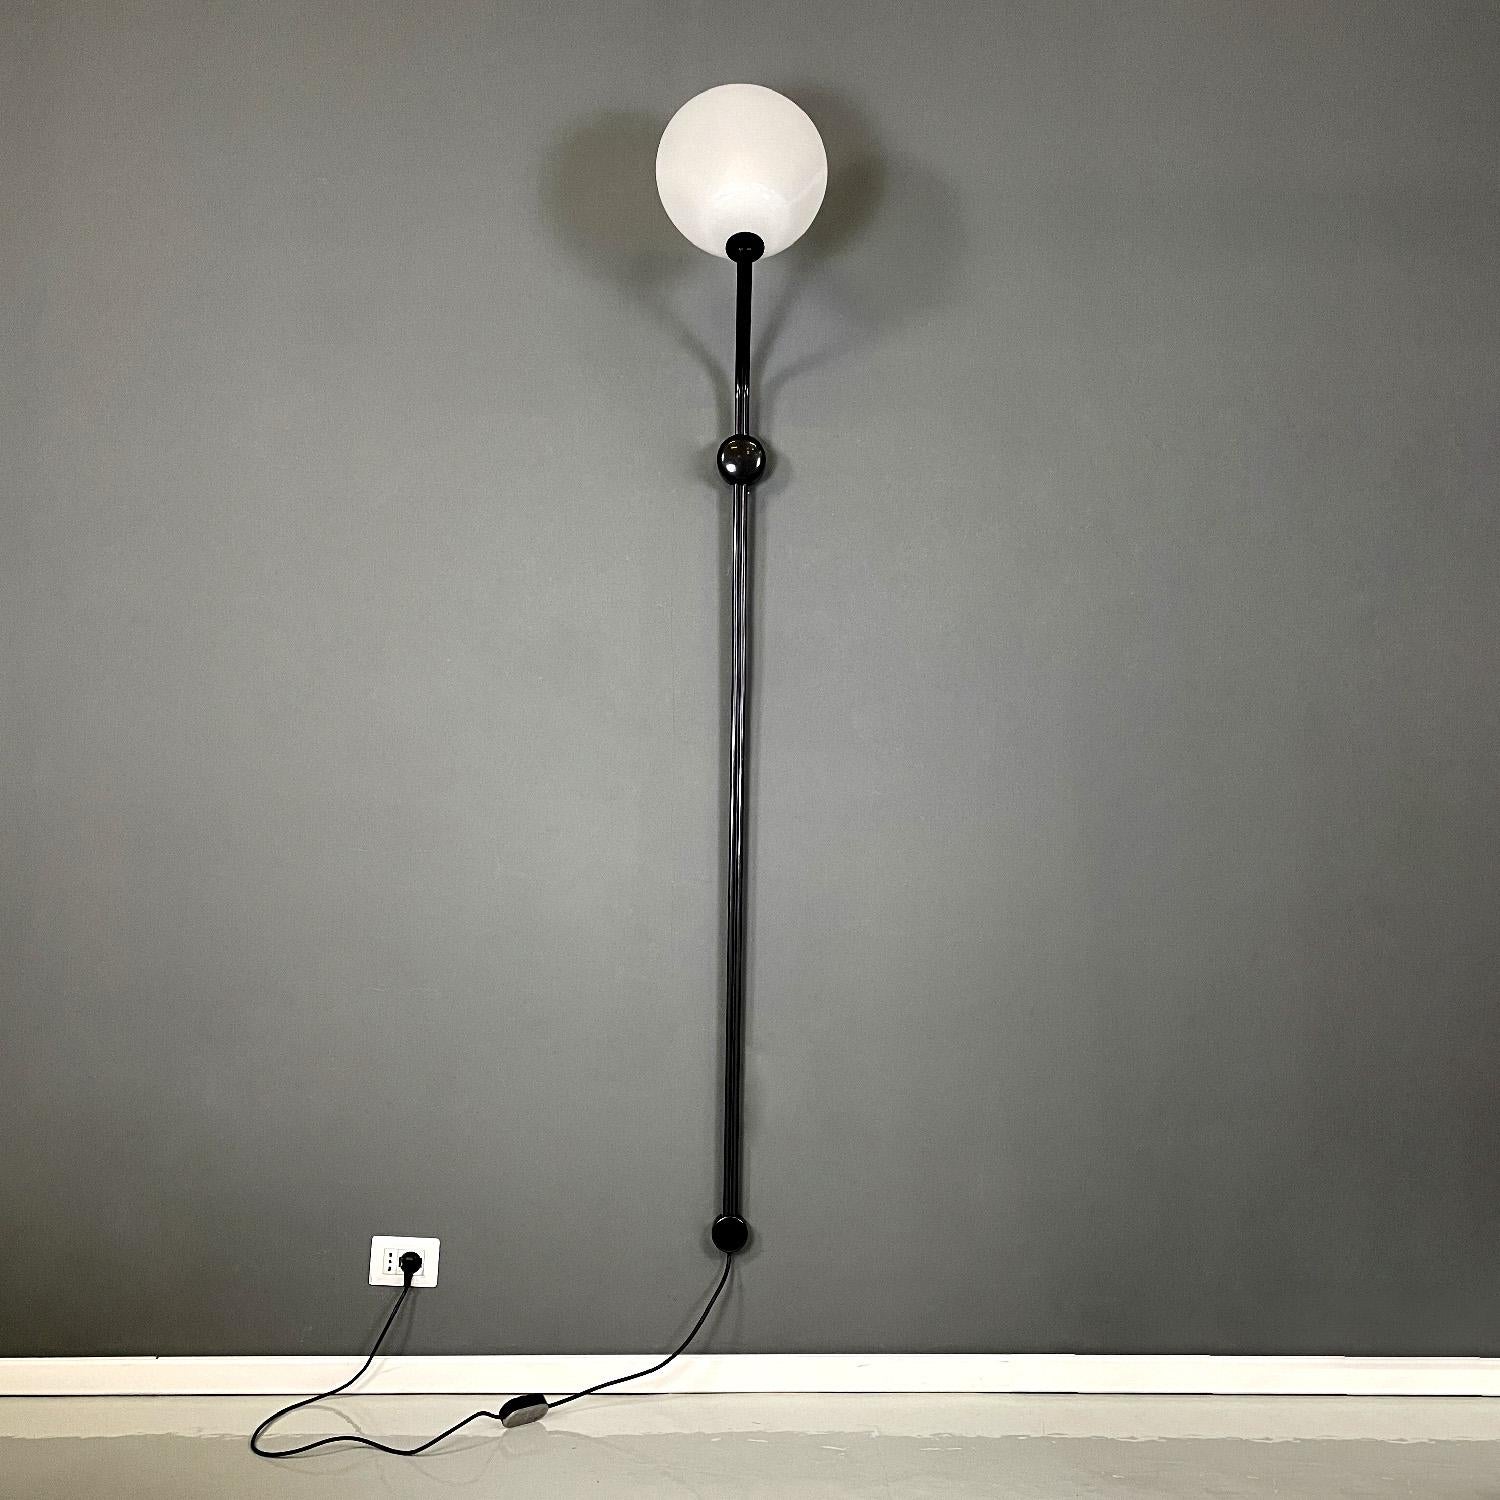 Italian modern applique Parter by Achille Castiglioni for Flos, 1970s
Applique mod. Parter. The structure is in gunmetal gray painted metal with a glossy finish and is composed of a central stem with two round components: one at the base and one in